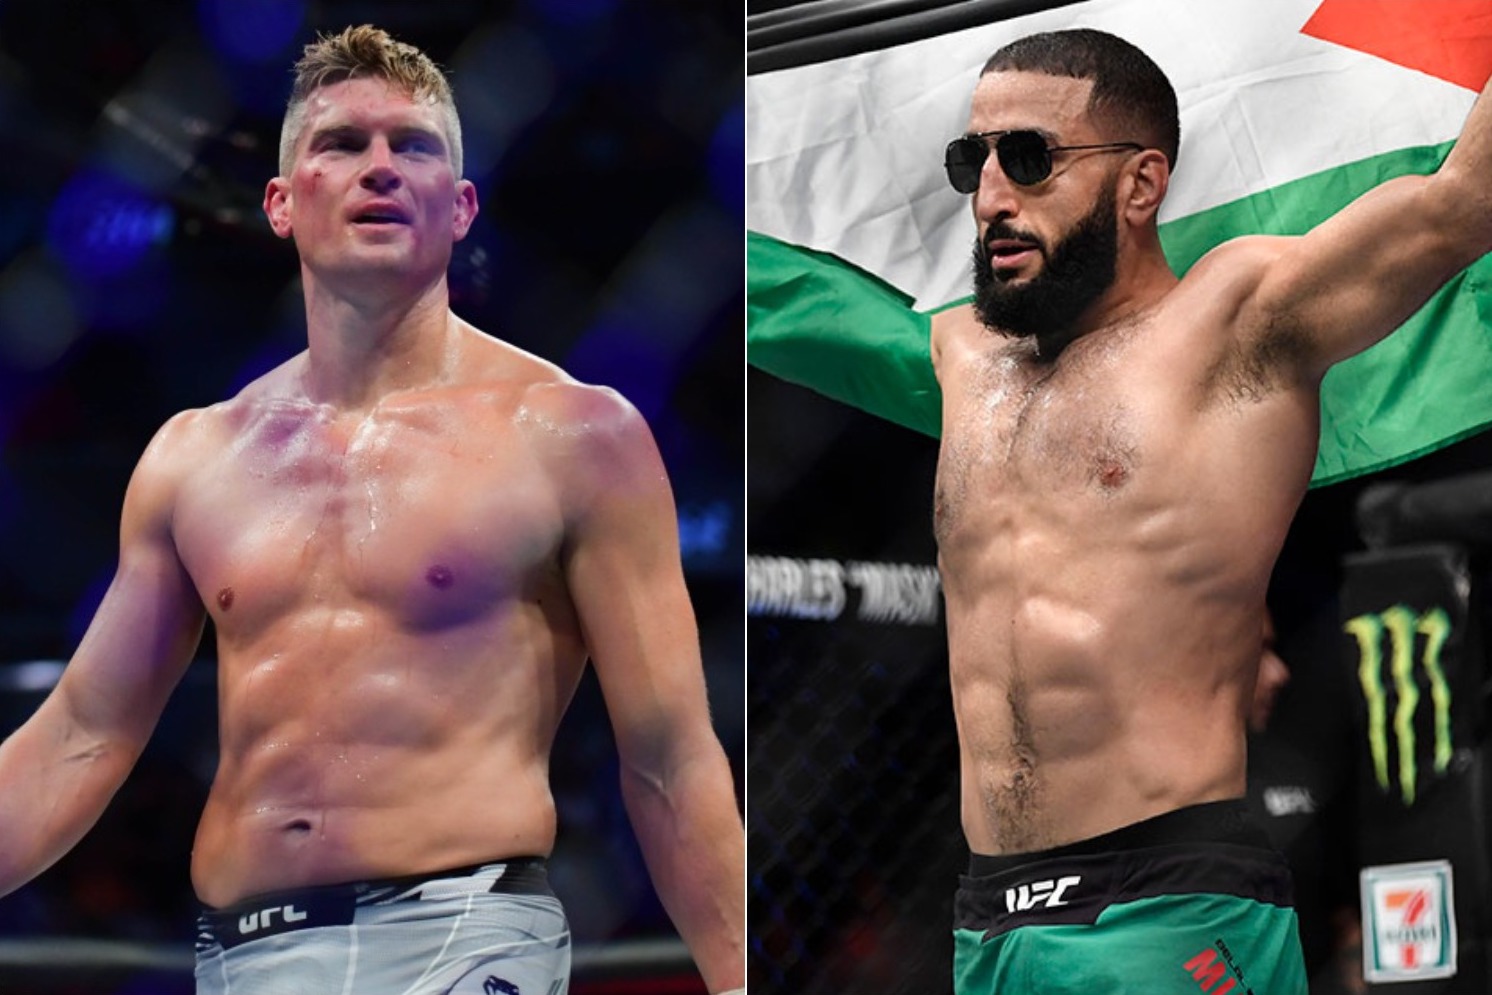 Who Are You Betting on in the Fight Between Stephen Thompson and Belal Muhammad?